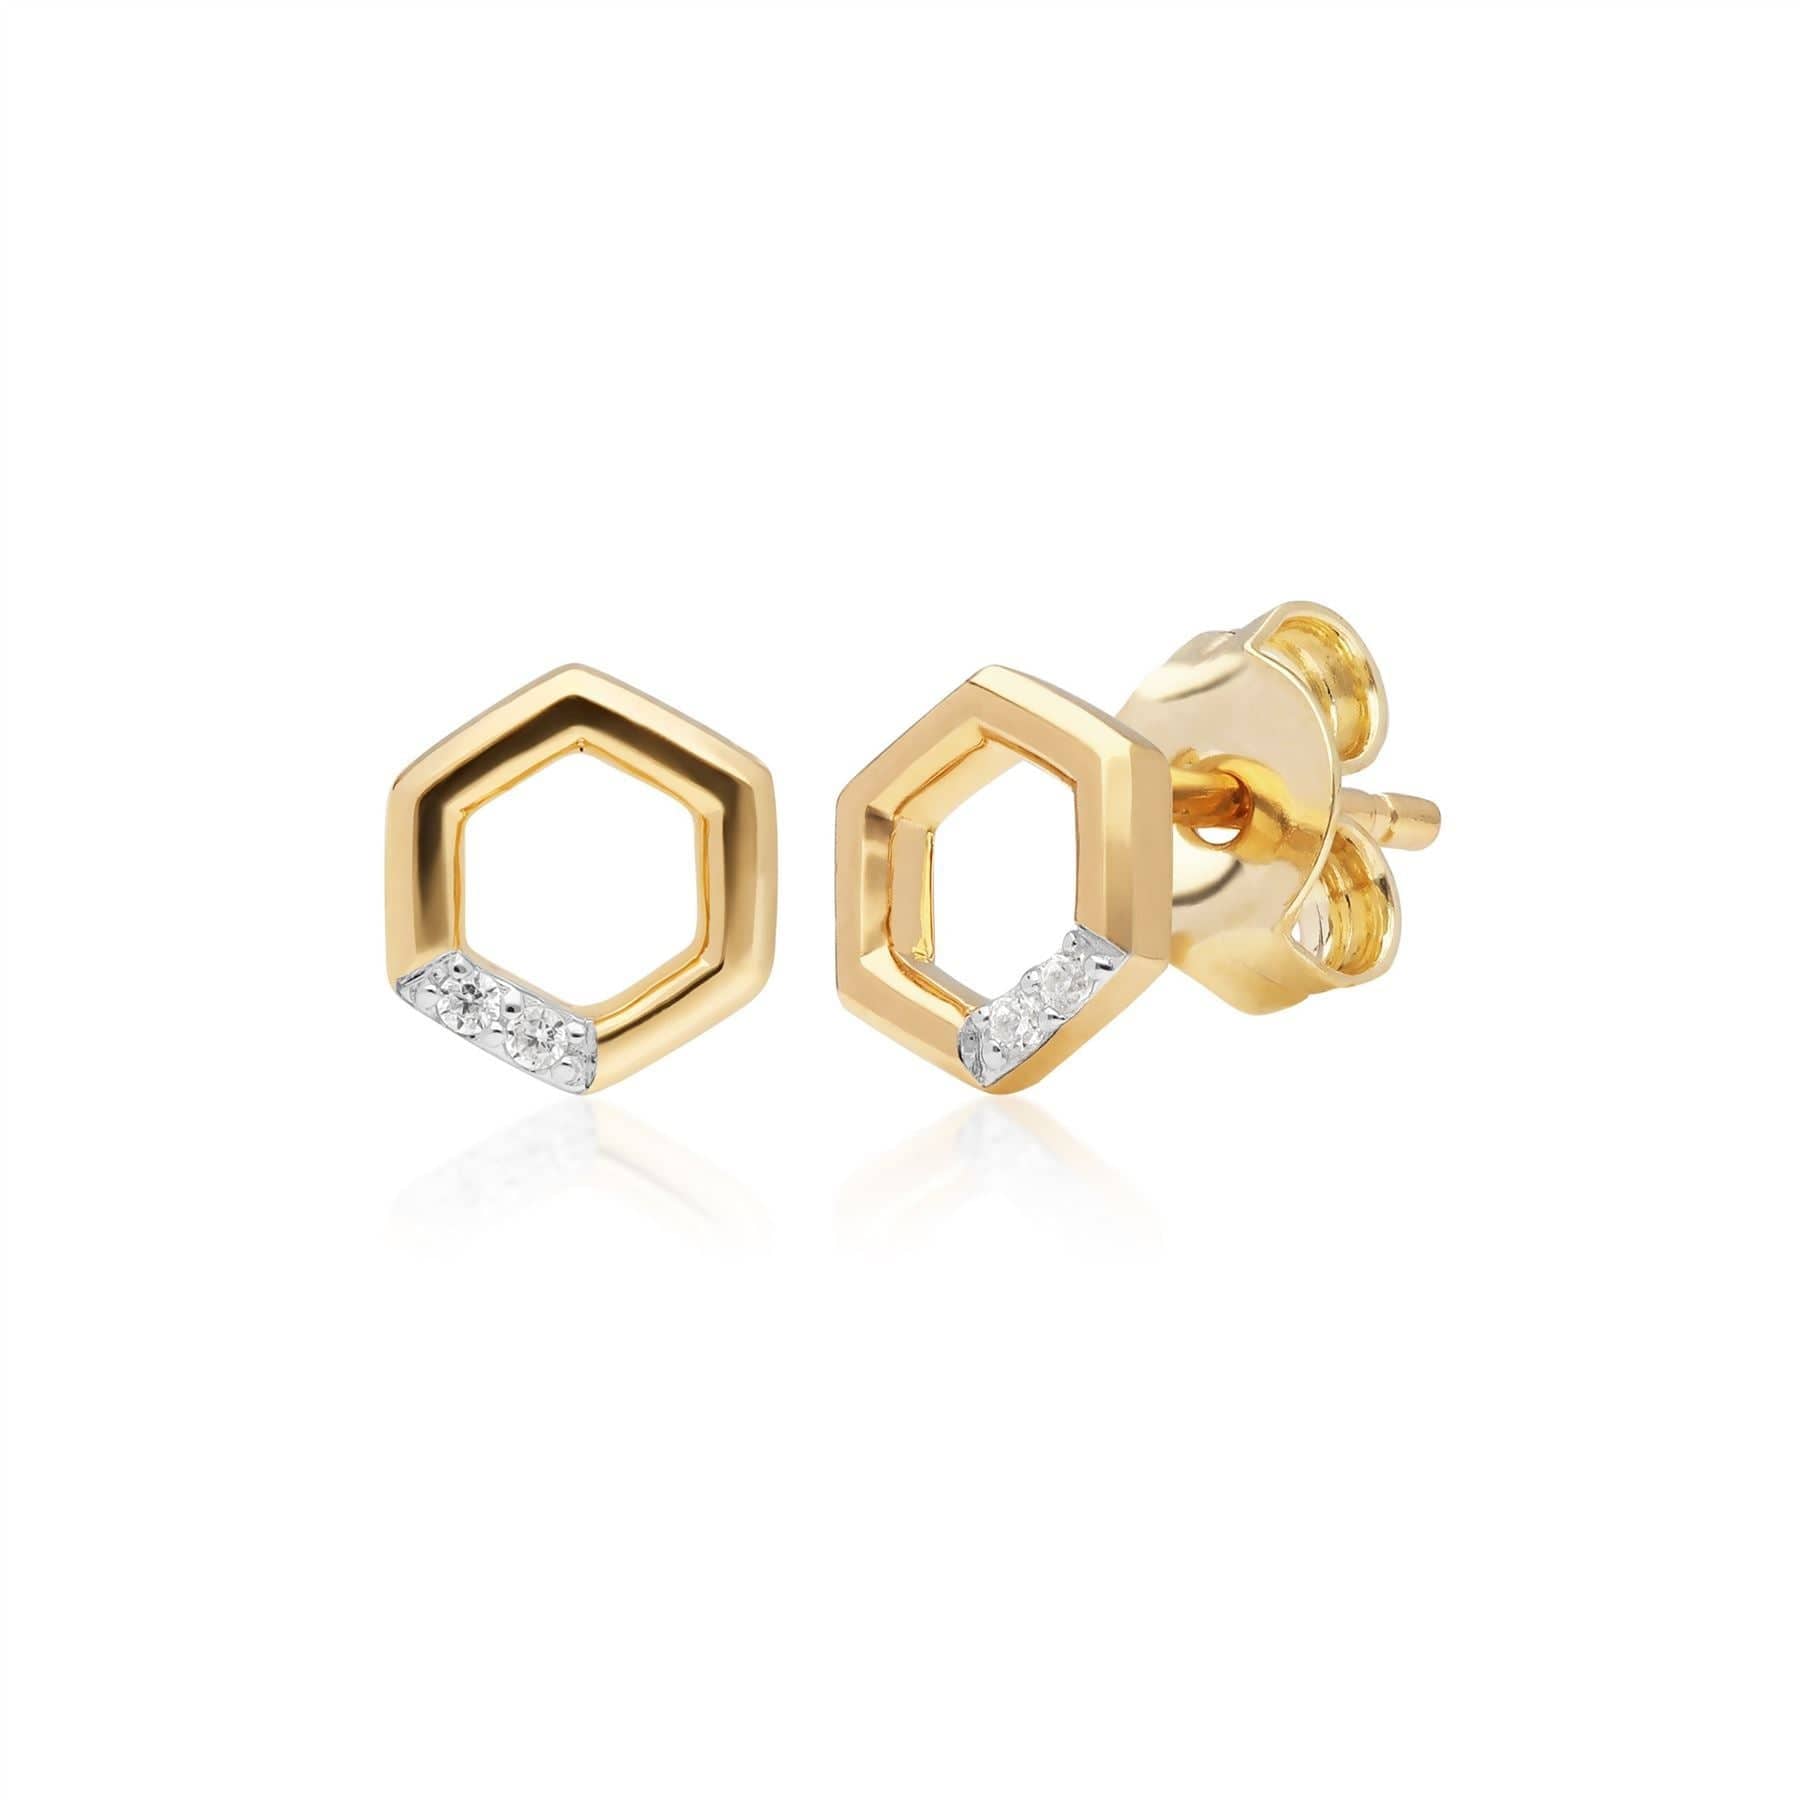 191E0392029-191R0896029 Diamond Pave Hexagon Stud Earring & Ring Set in 9ct Yellow Gold 2